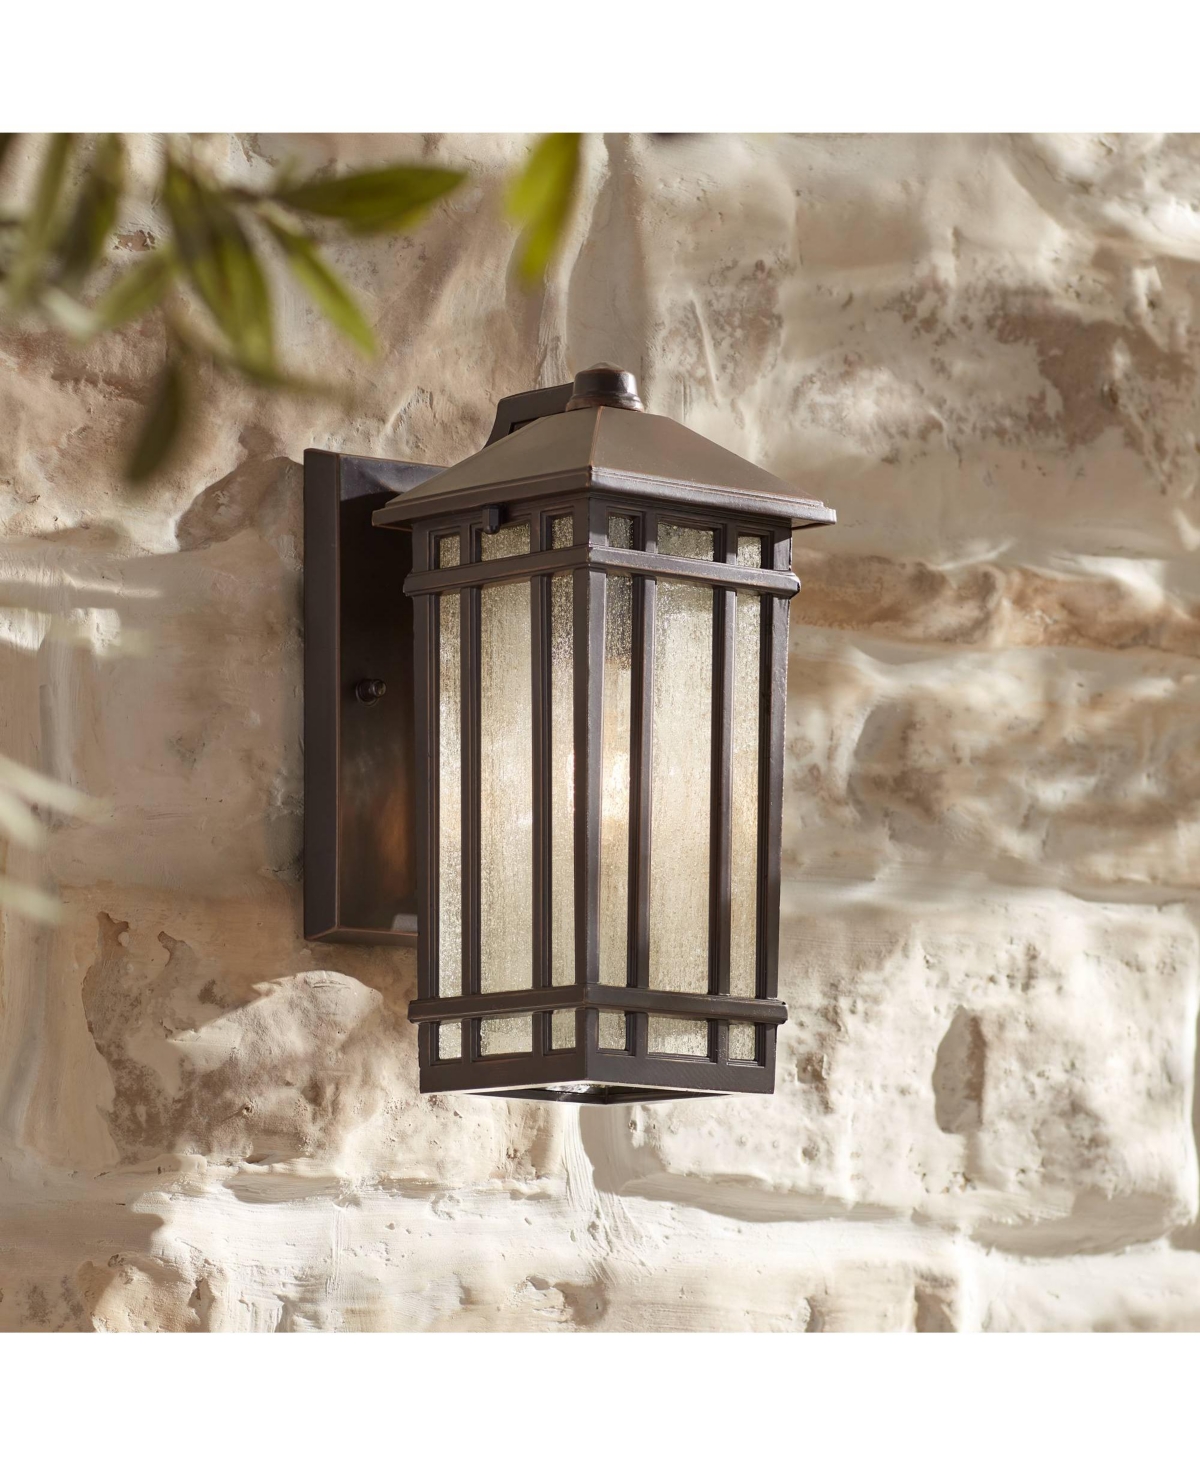 Sierra Craftsman Art Deco Outdoor Wall Light Fixture Rubbed Bronze Metal 10 1/2" Frosted Seeded Glass Panels for Exterior House Porch Patio Outside De